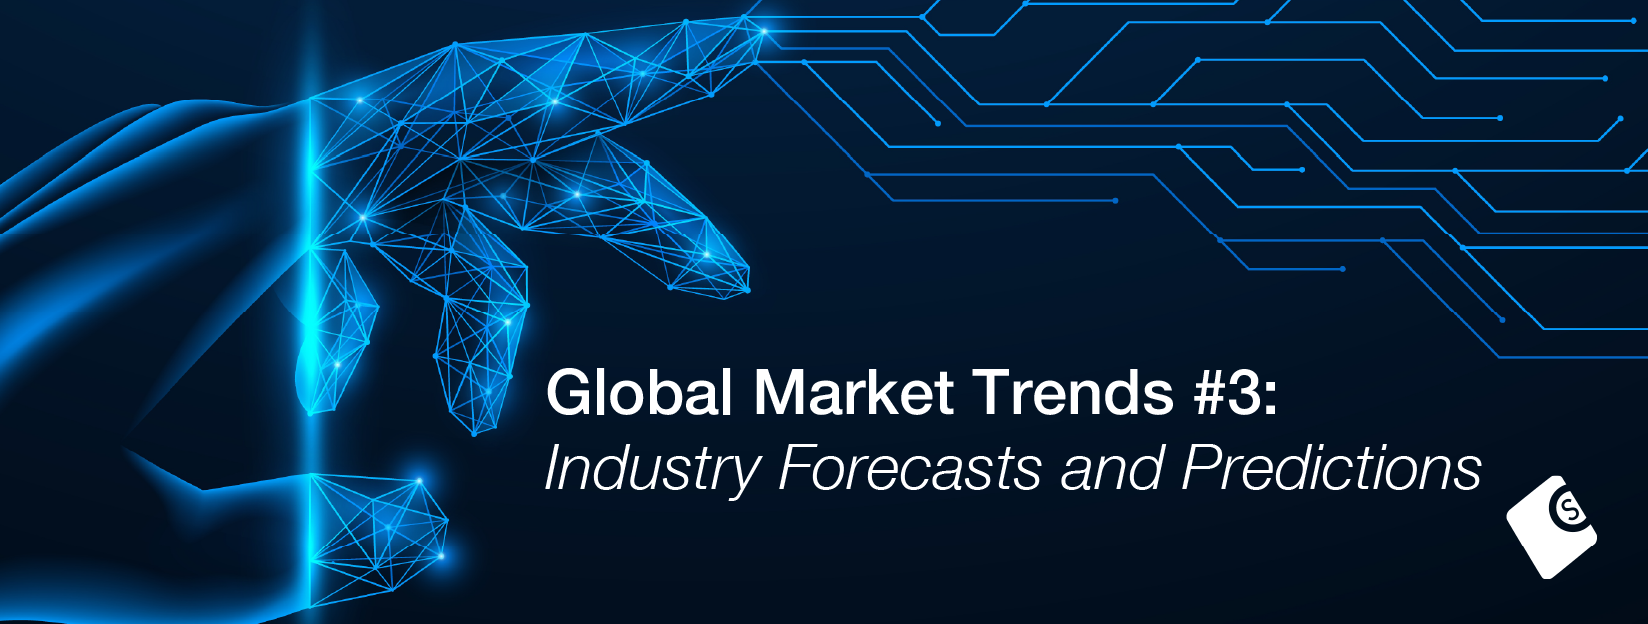 Global Market Trends #3: Industry Forecasts and Predictions